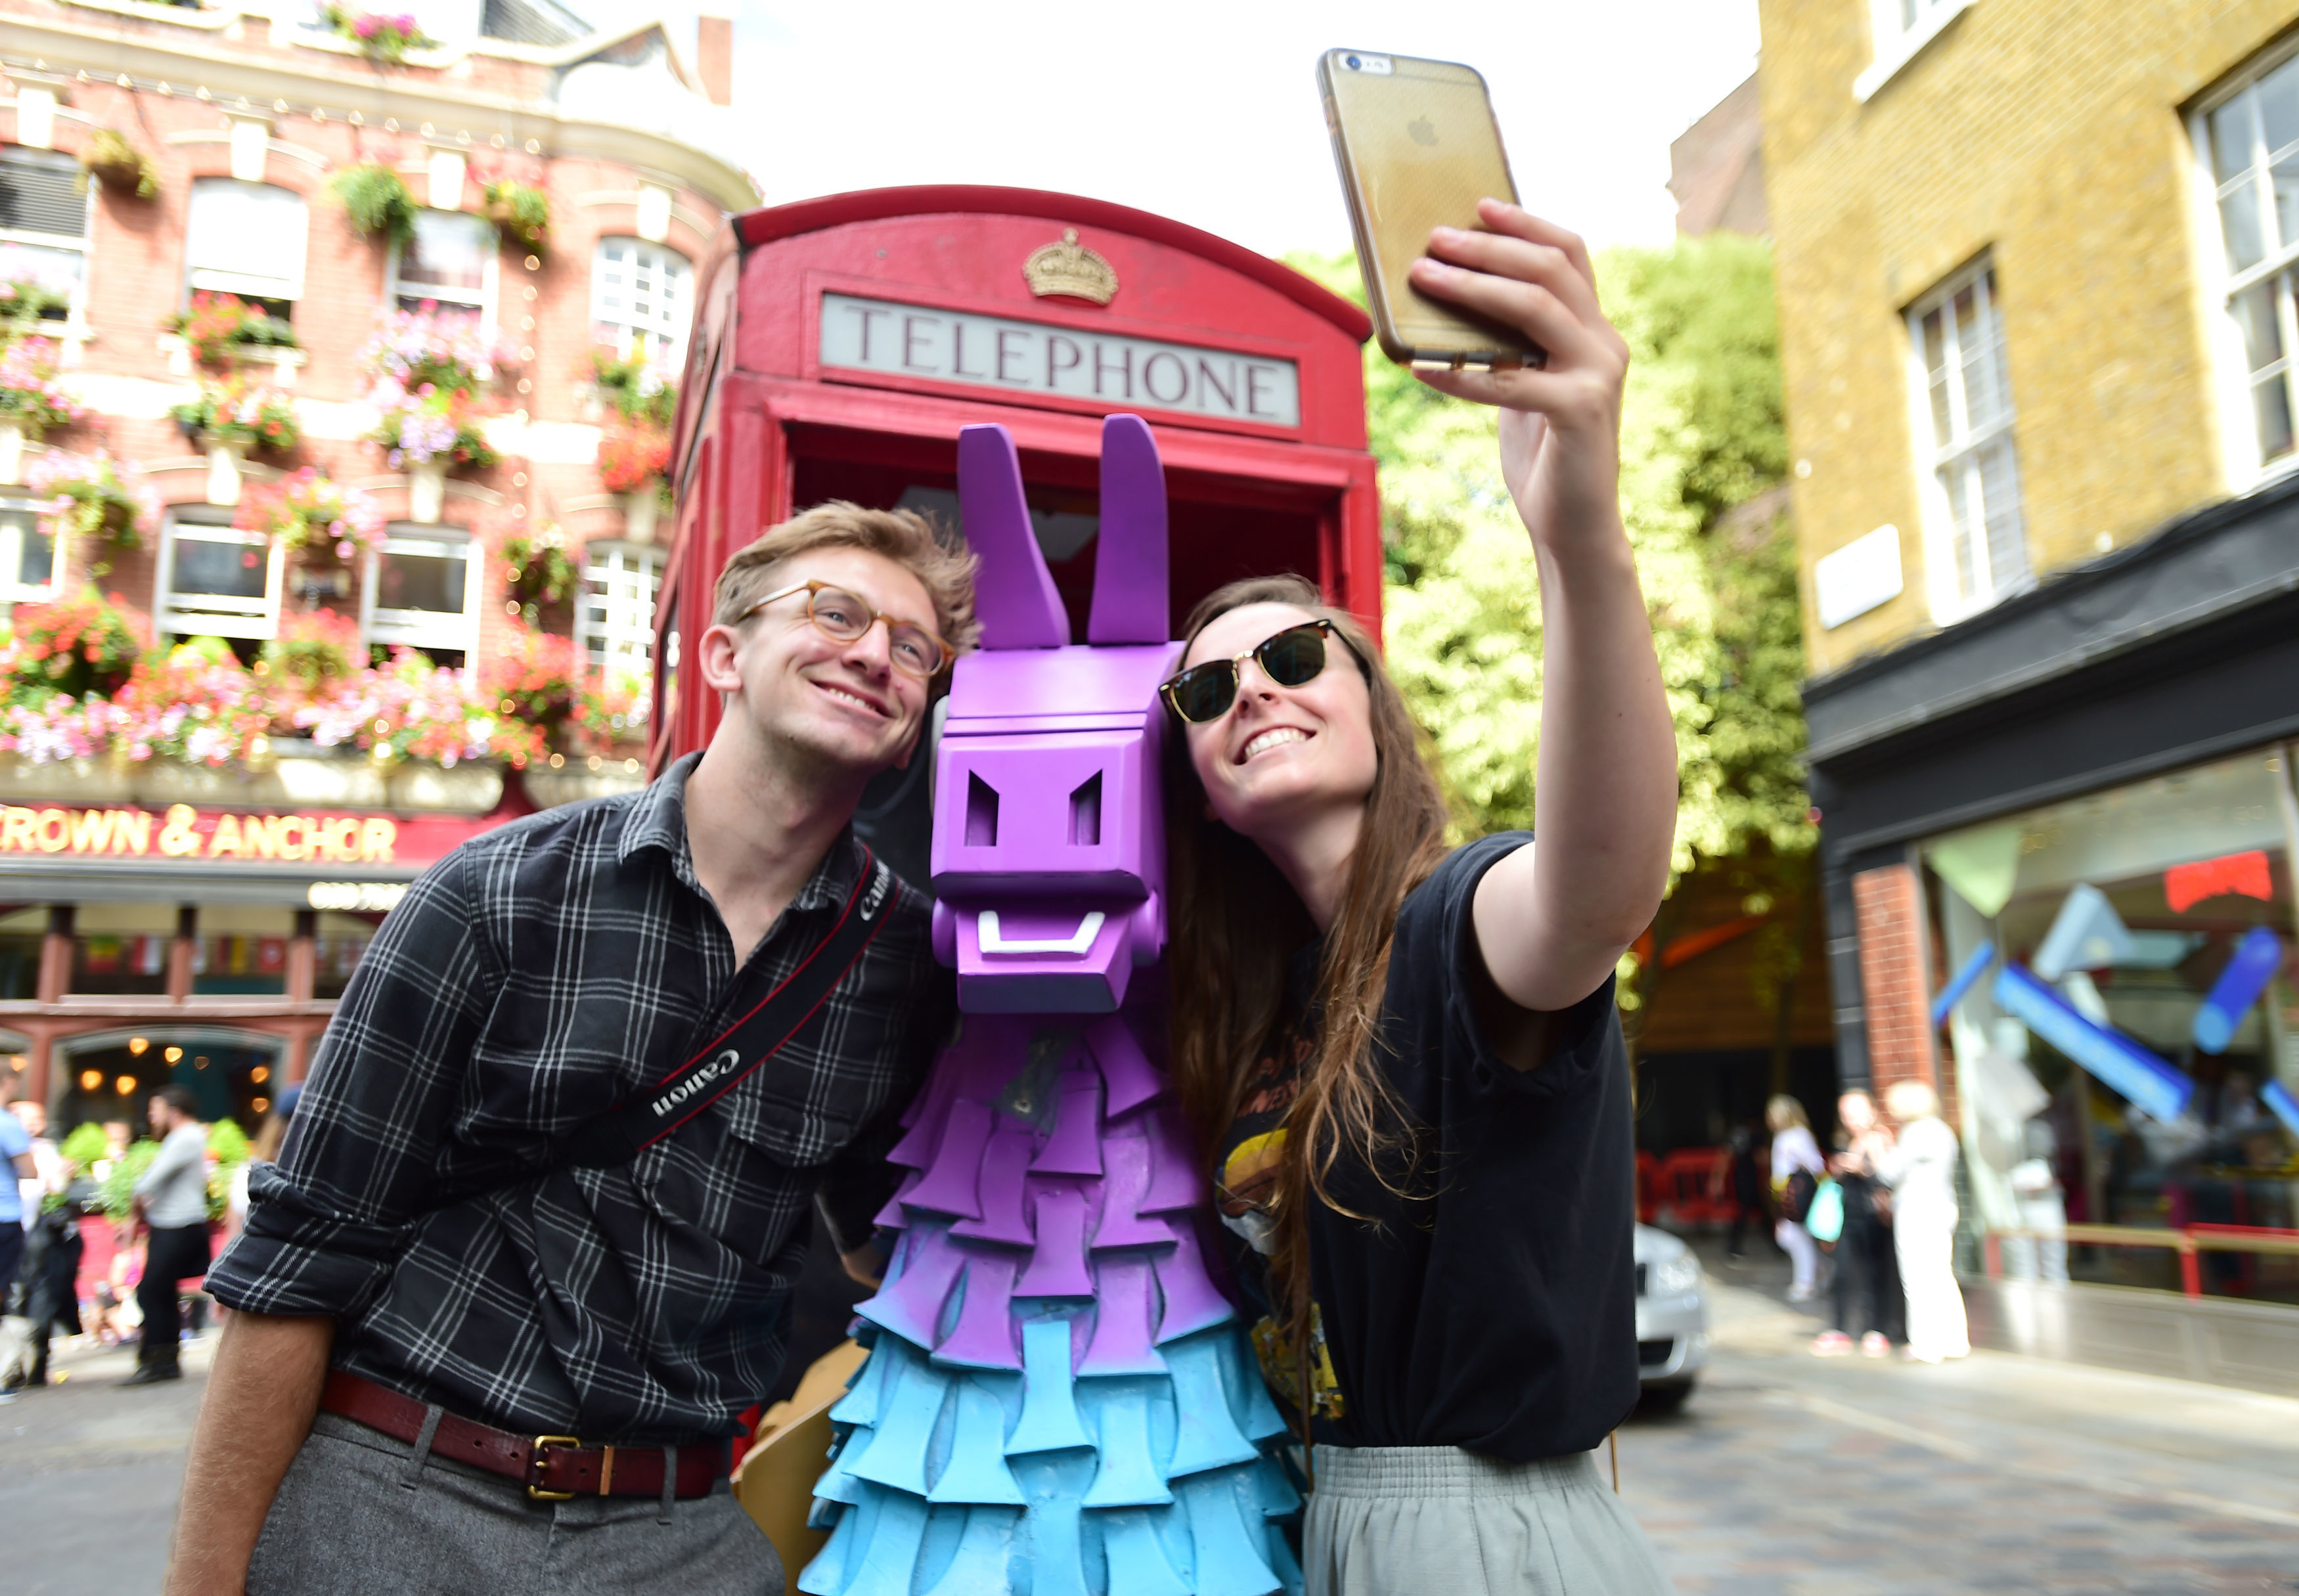 People take a selfie with a Fortnite Loot Llama in a red telephone box on Neal Street in Covent Garden, London